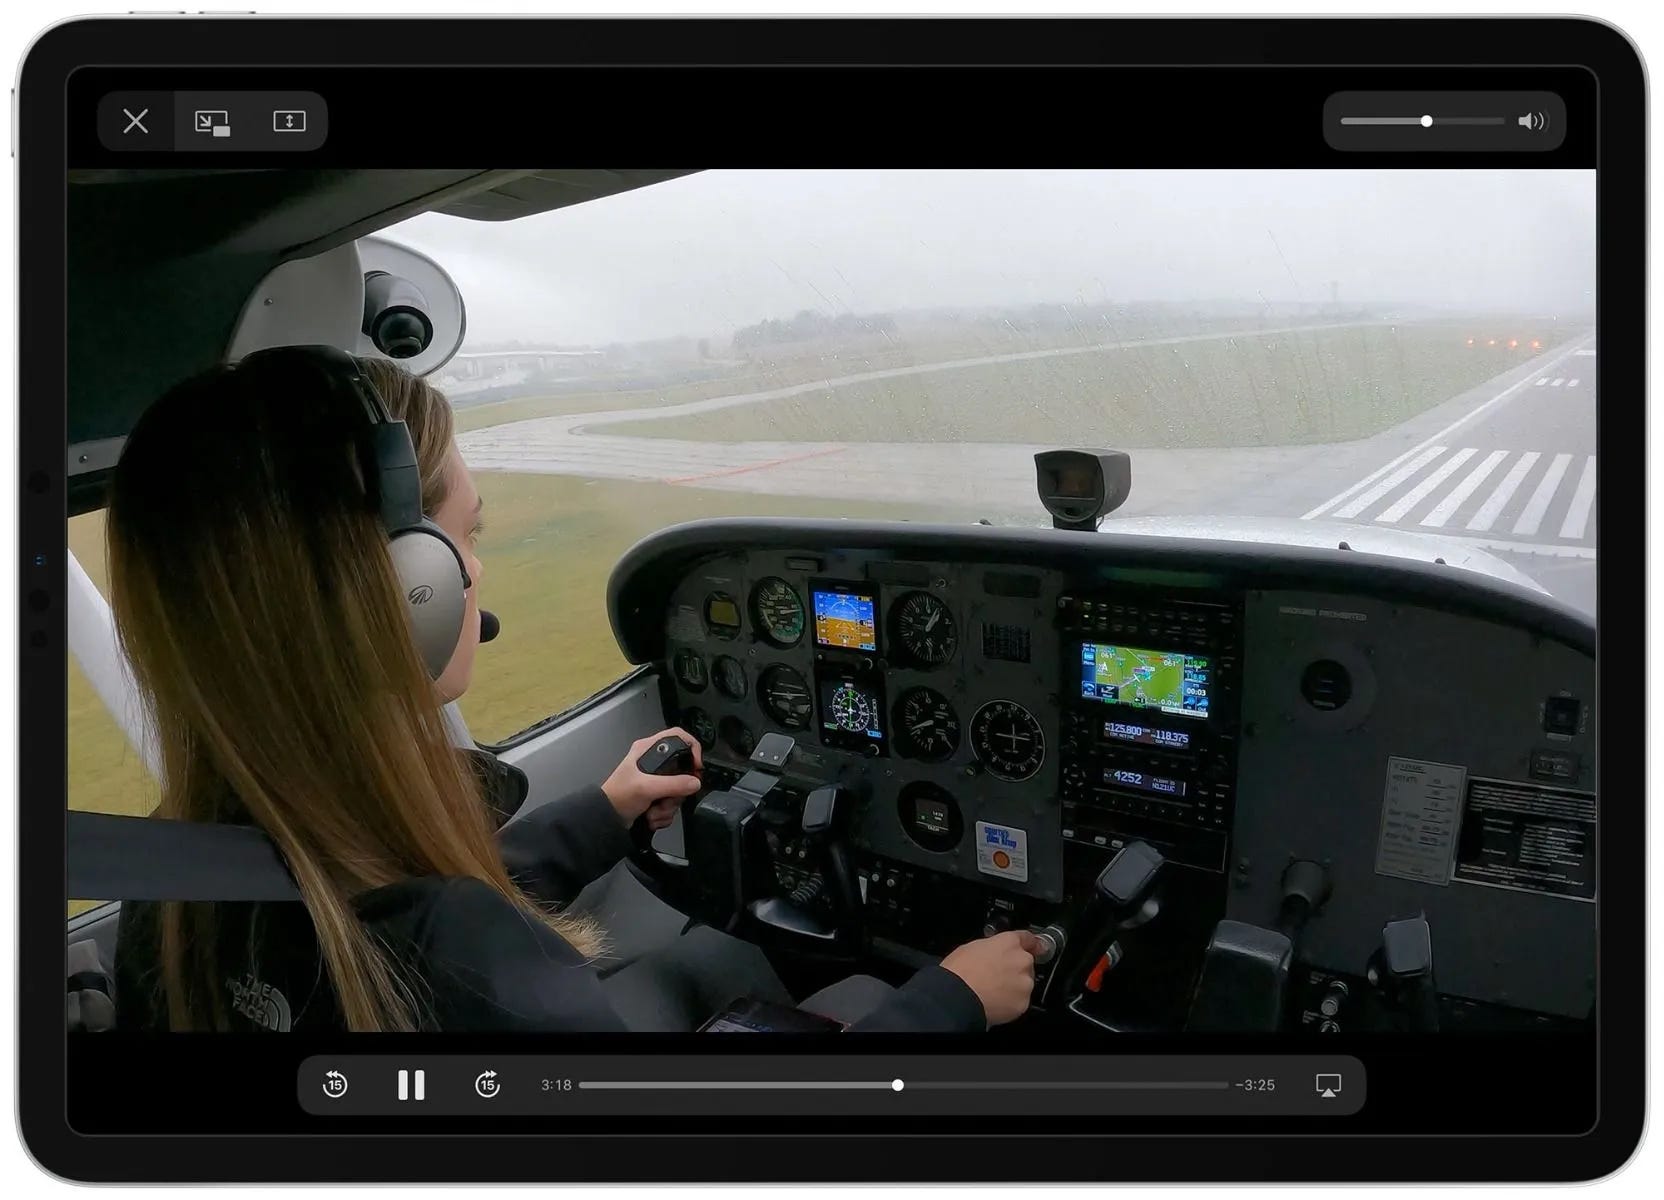 Sporty's Instrument Rating Course